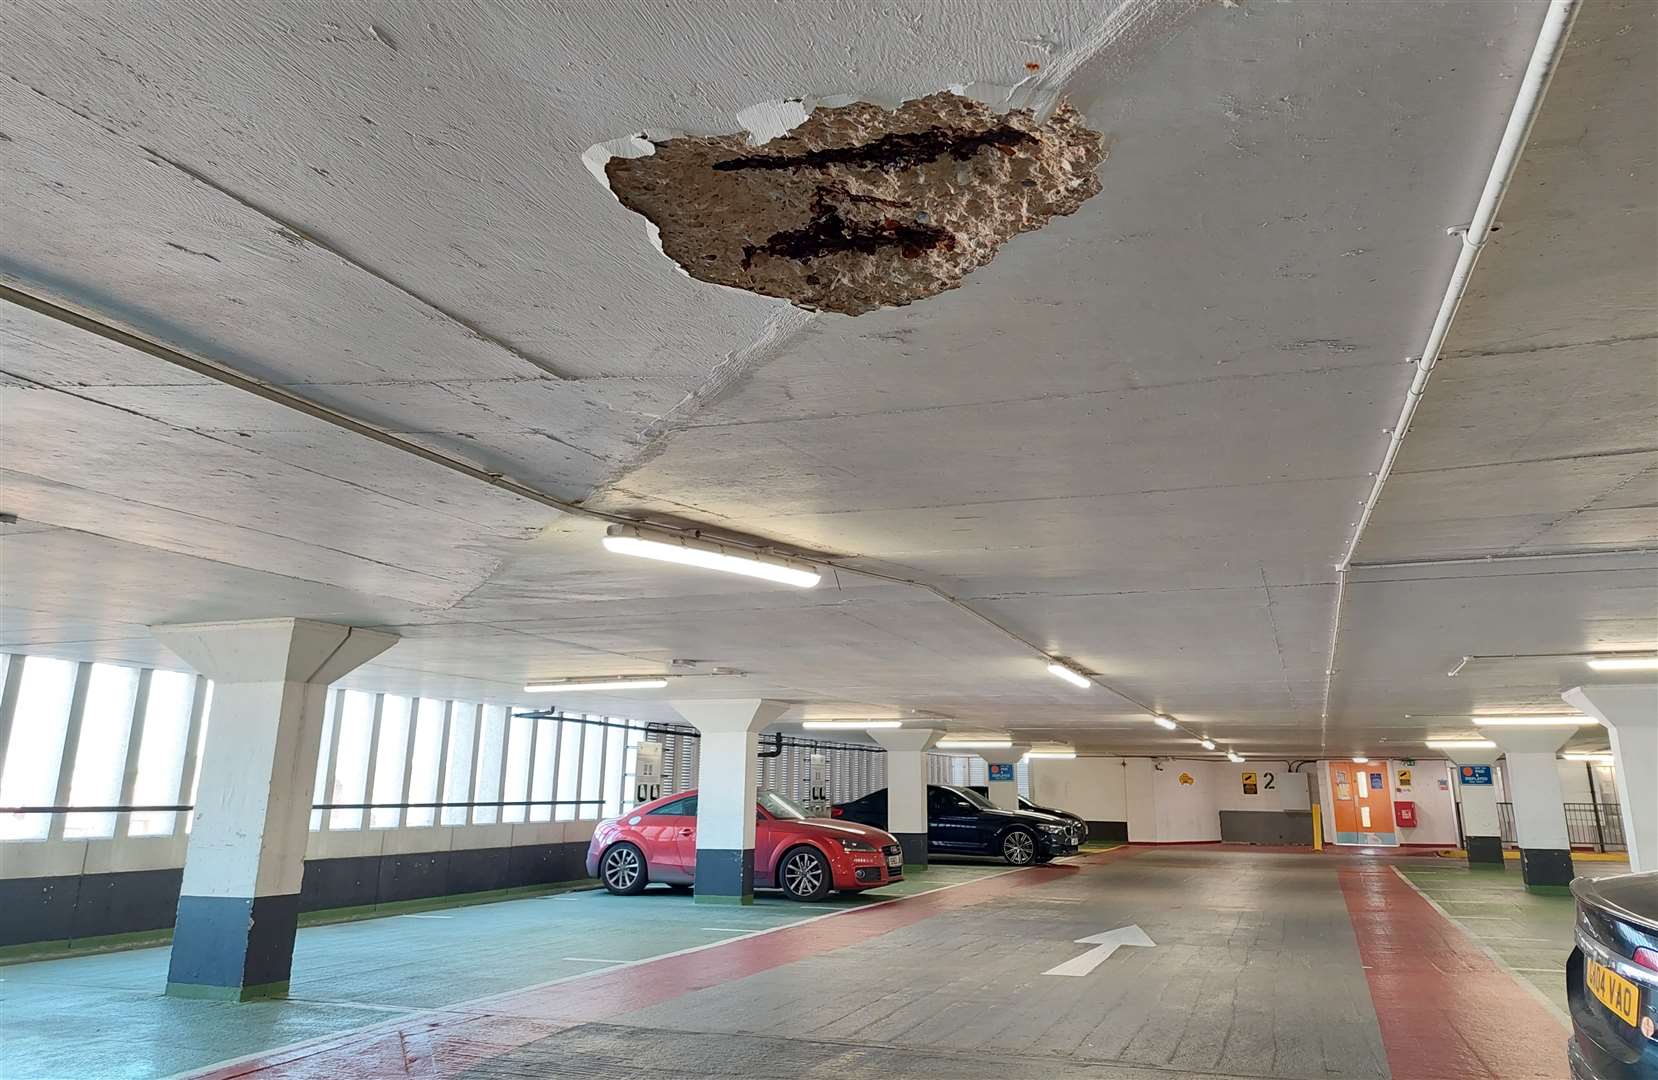 Part of the ceiling on the second storey of Edinburgh Road car park fell in last month